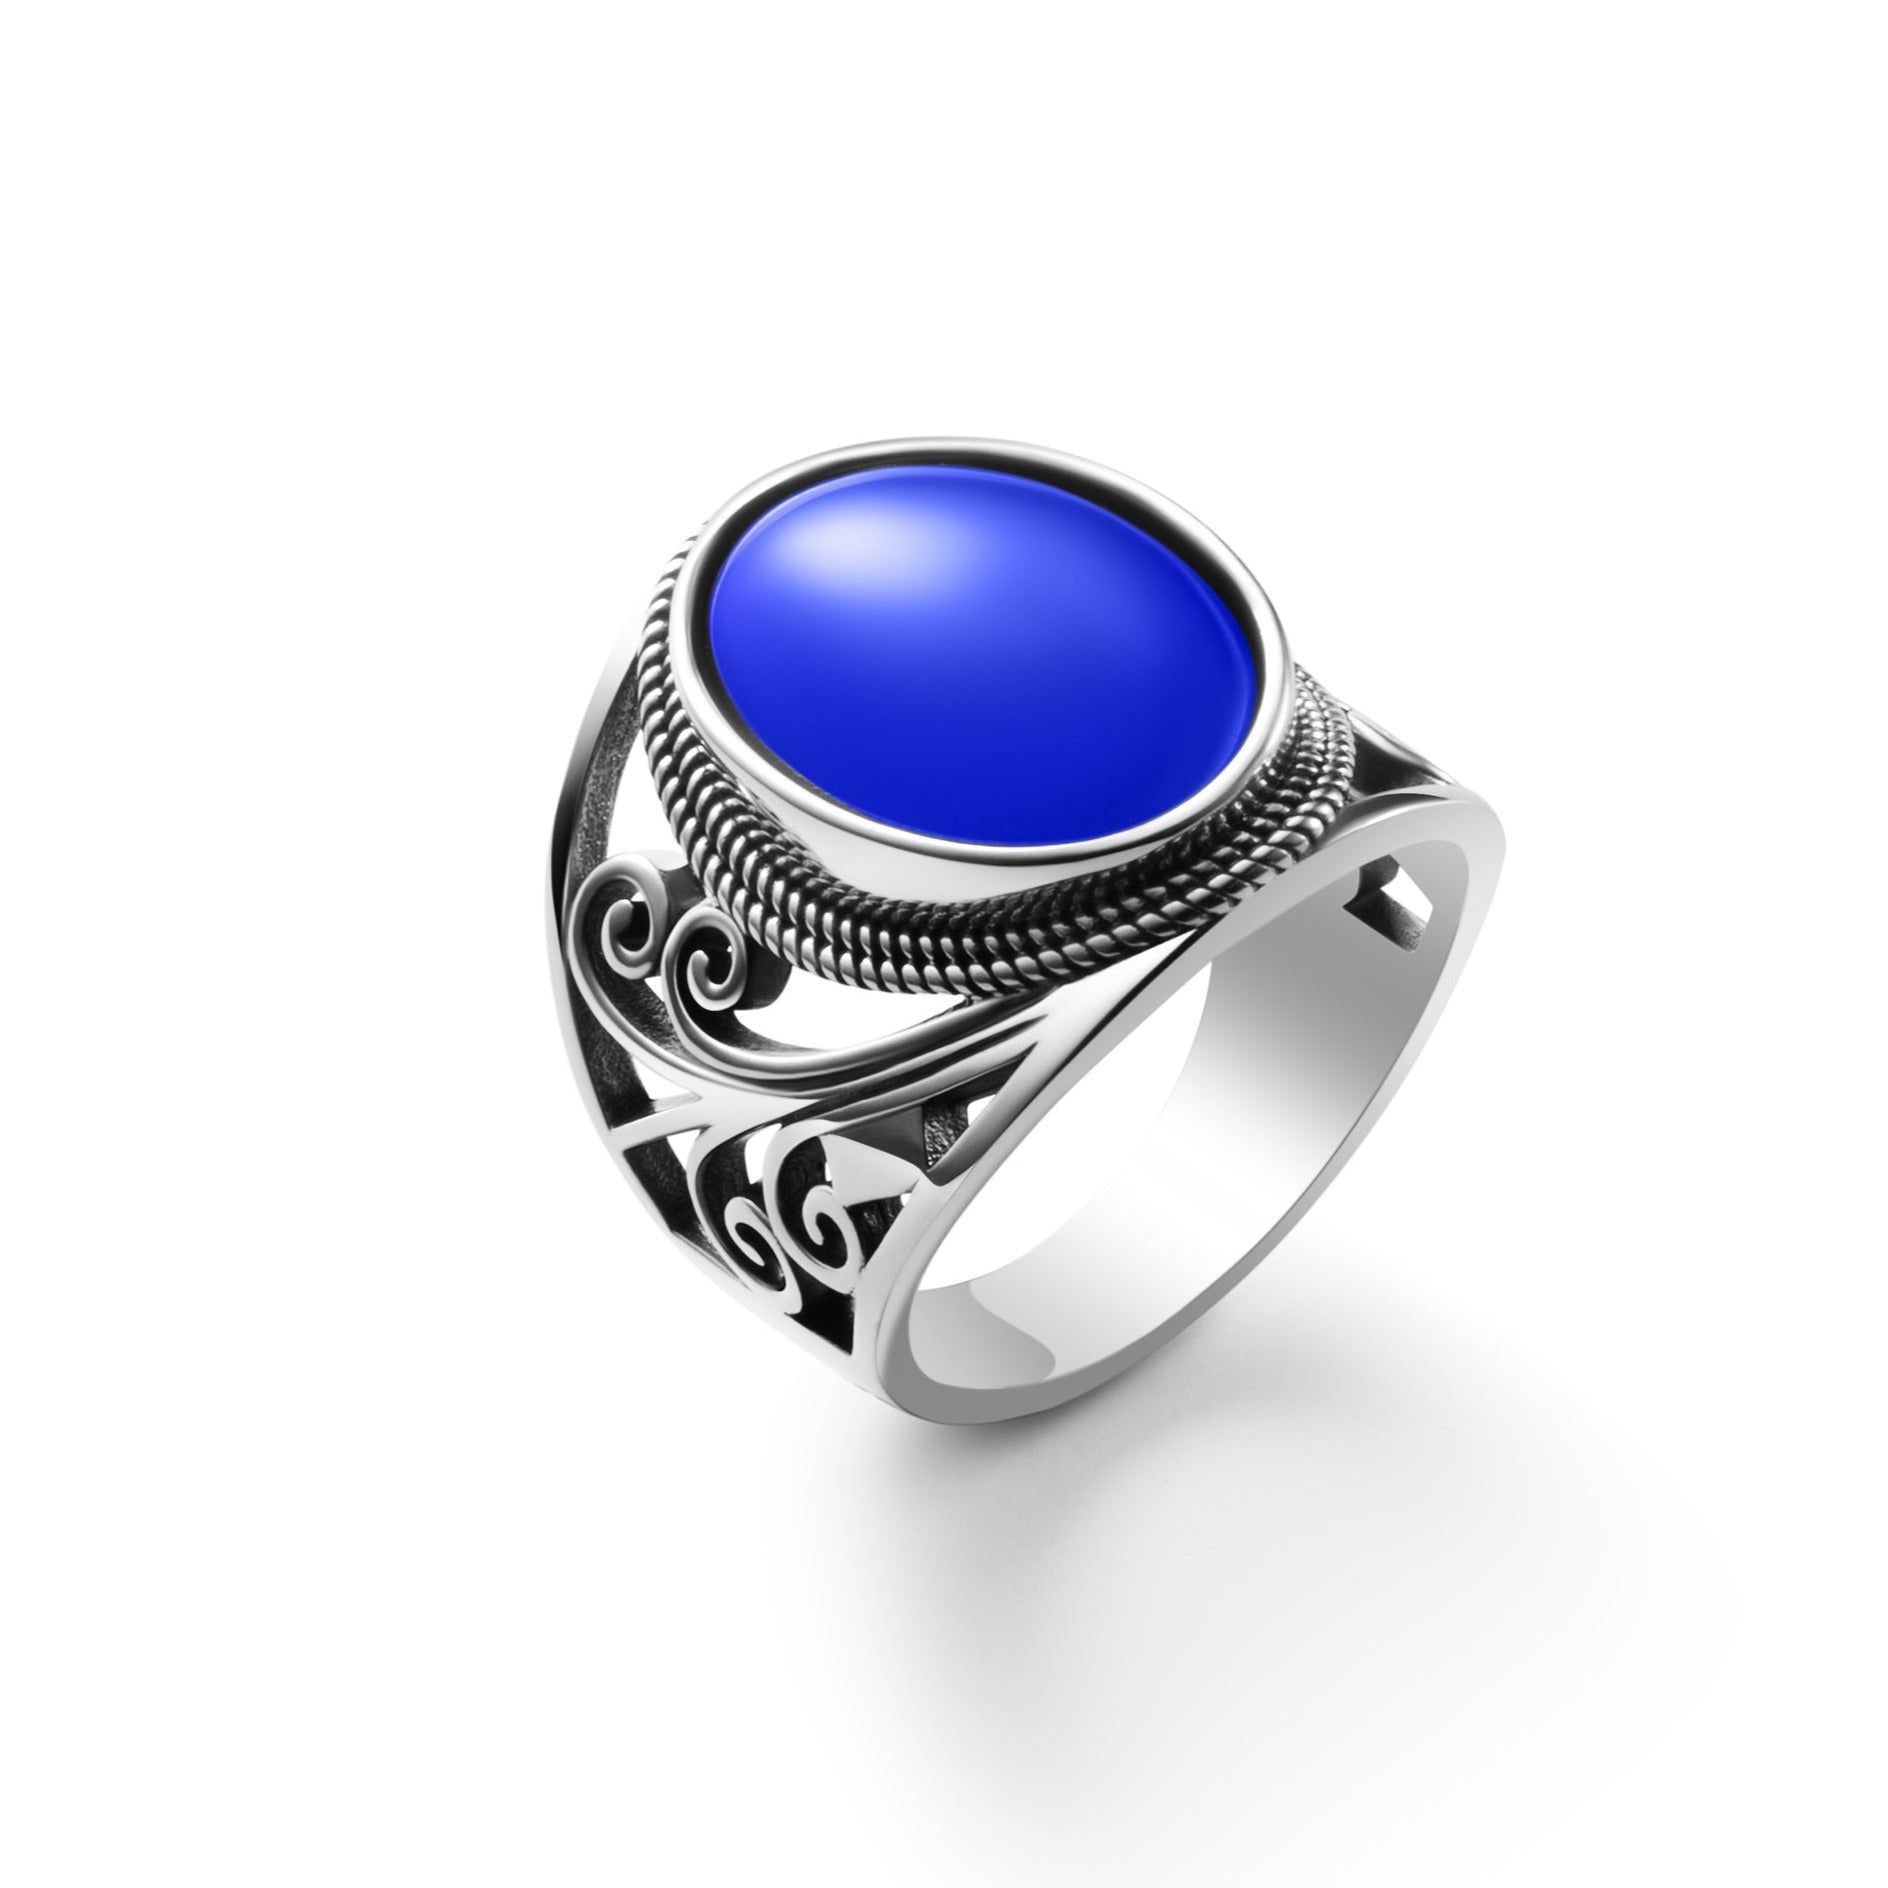 New Age Mood Ring